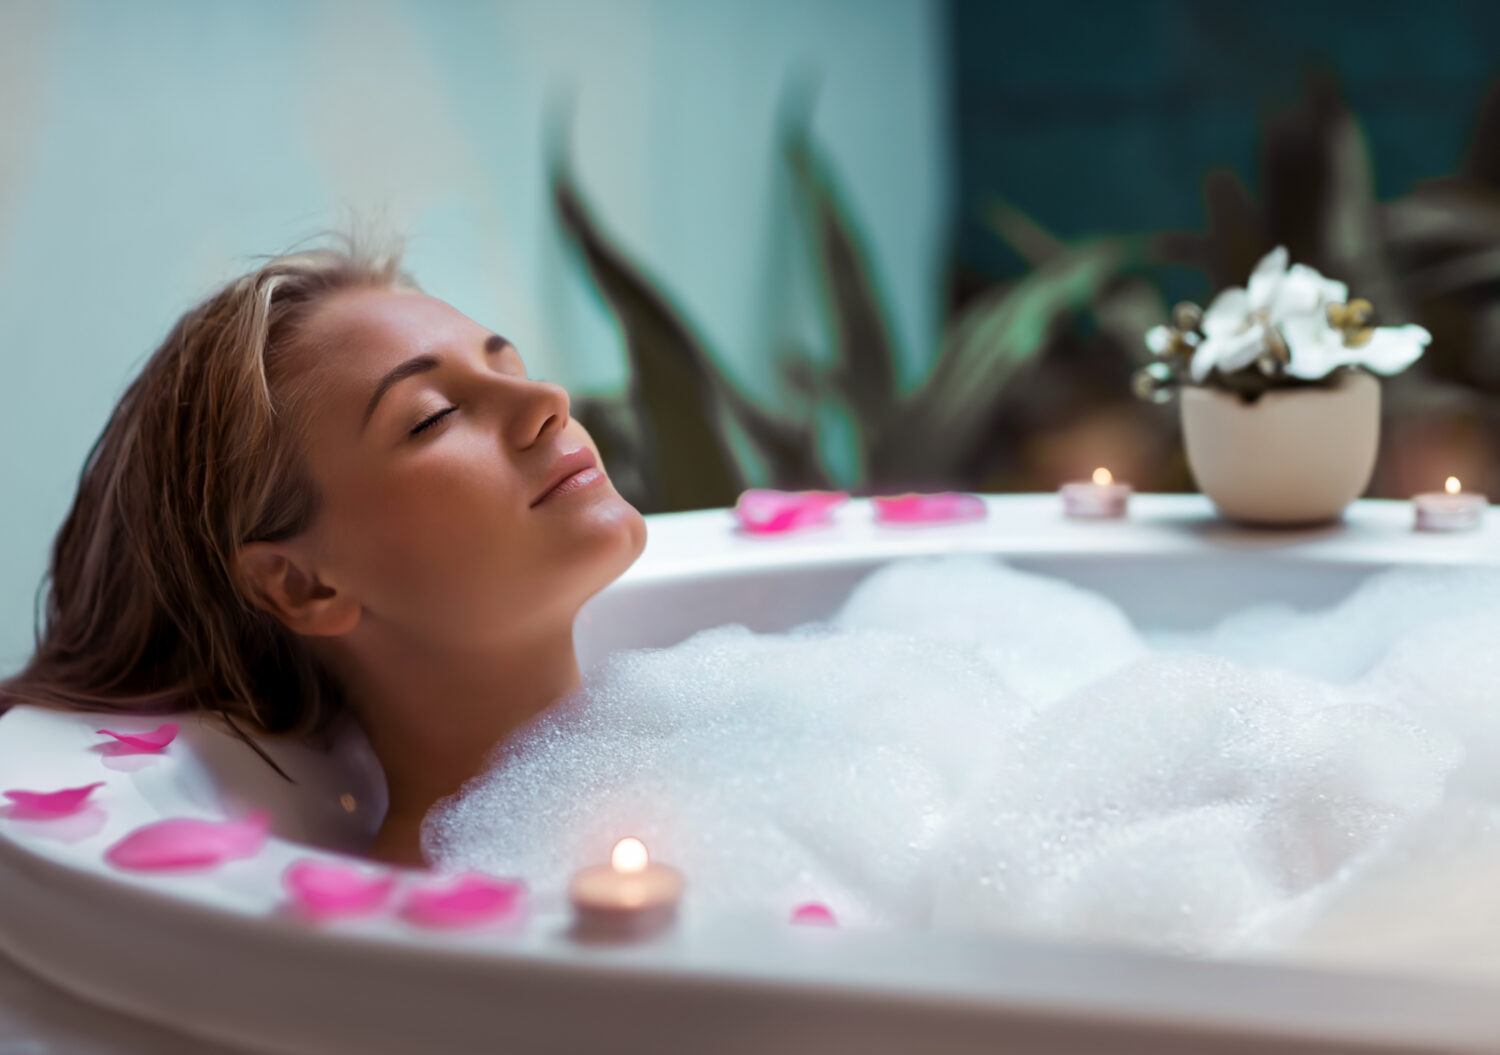 woman taking a bath with foam and petals on the rim of the tub